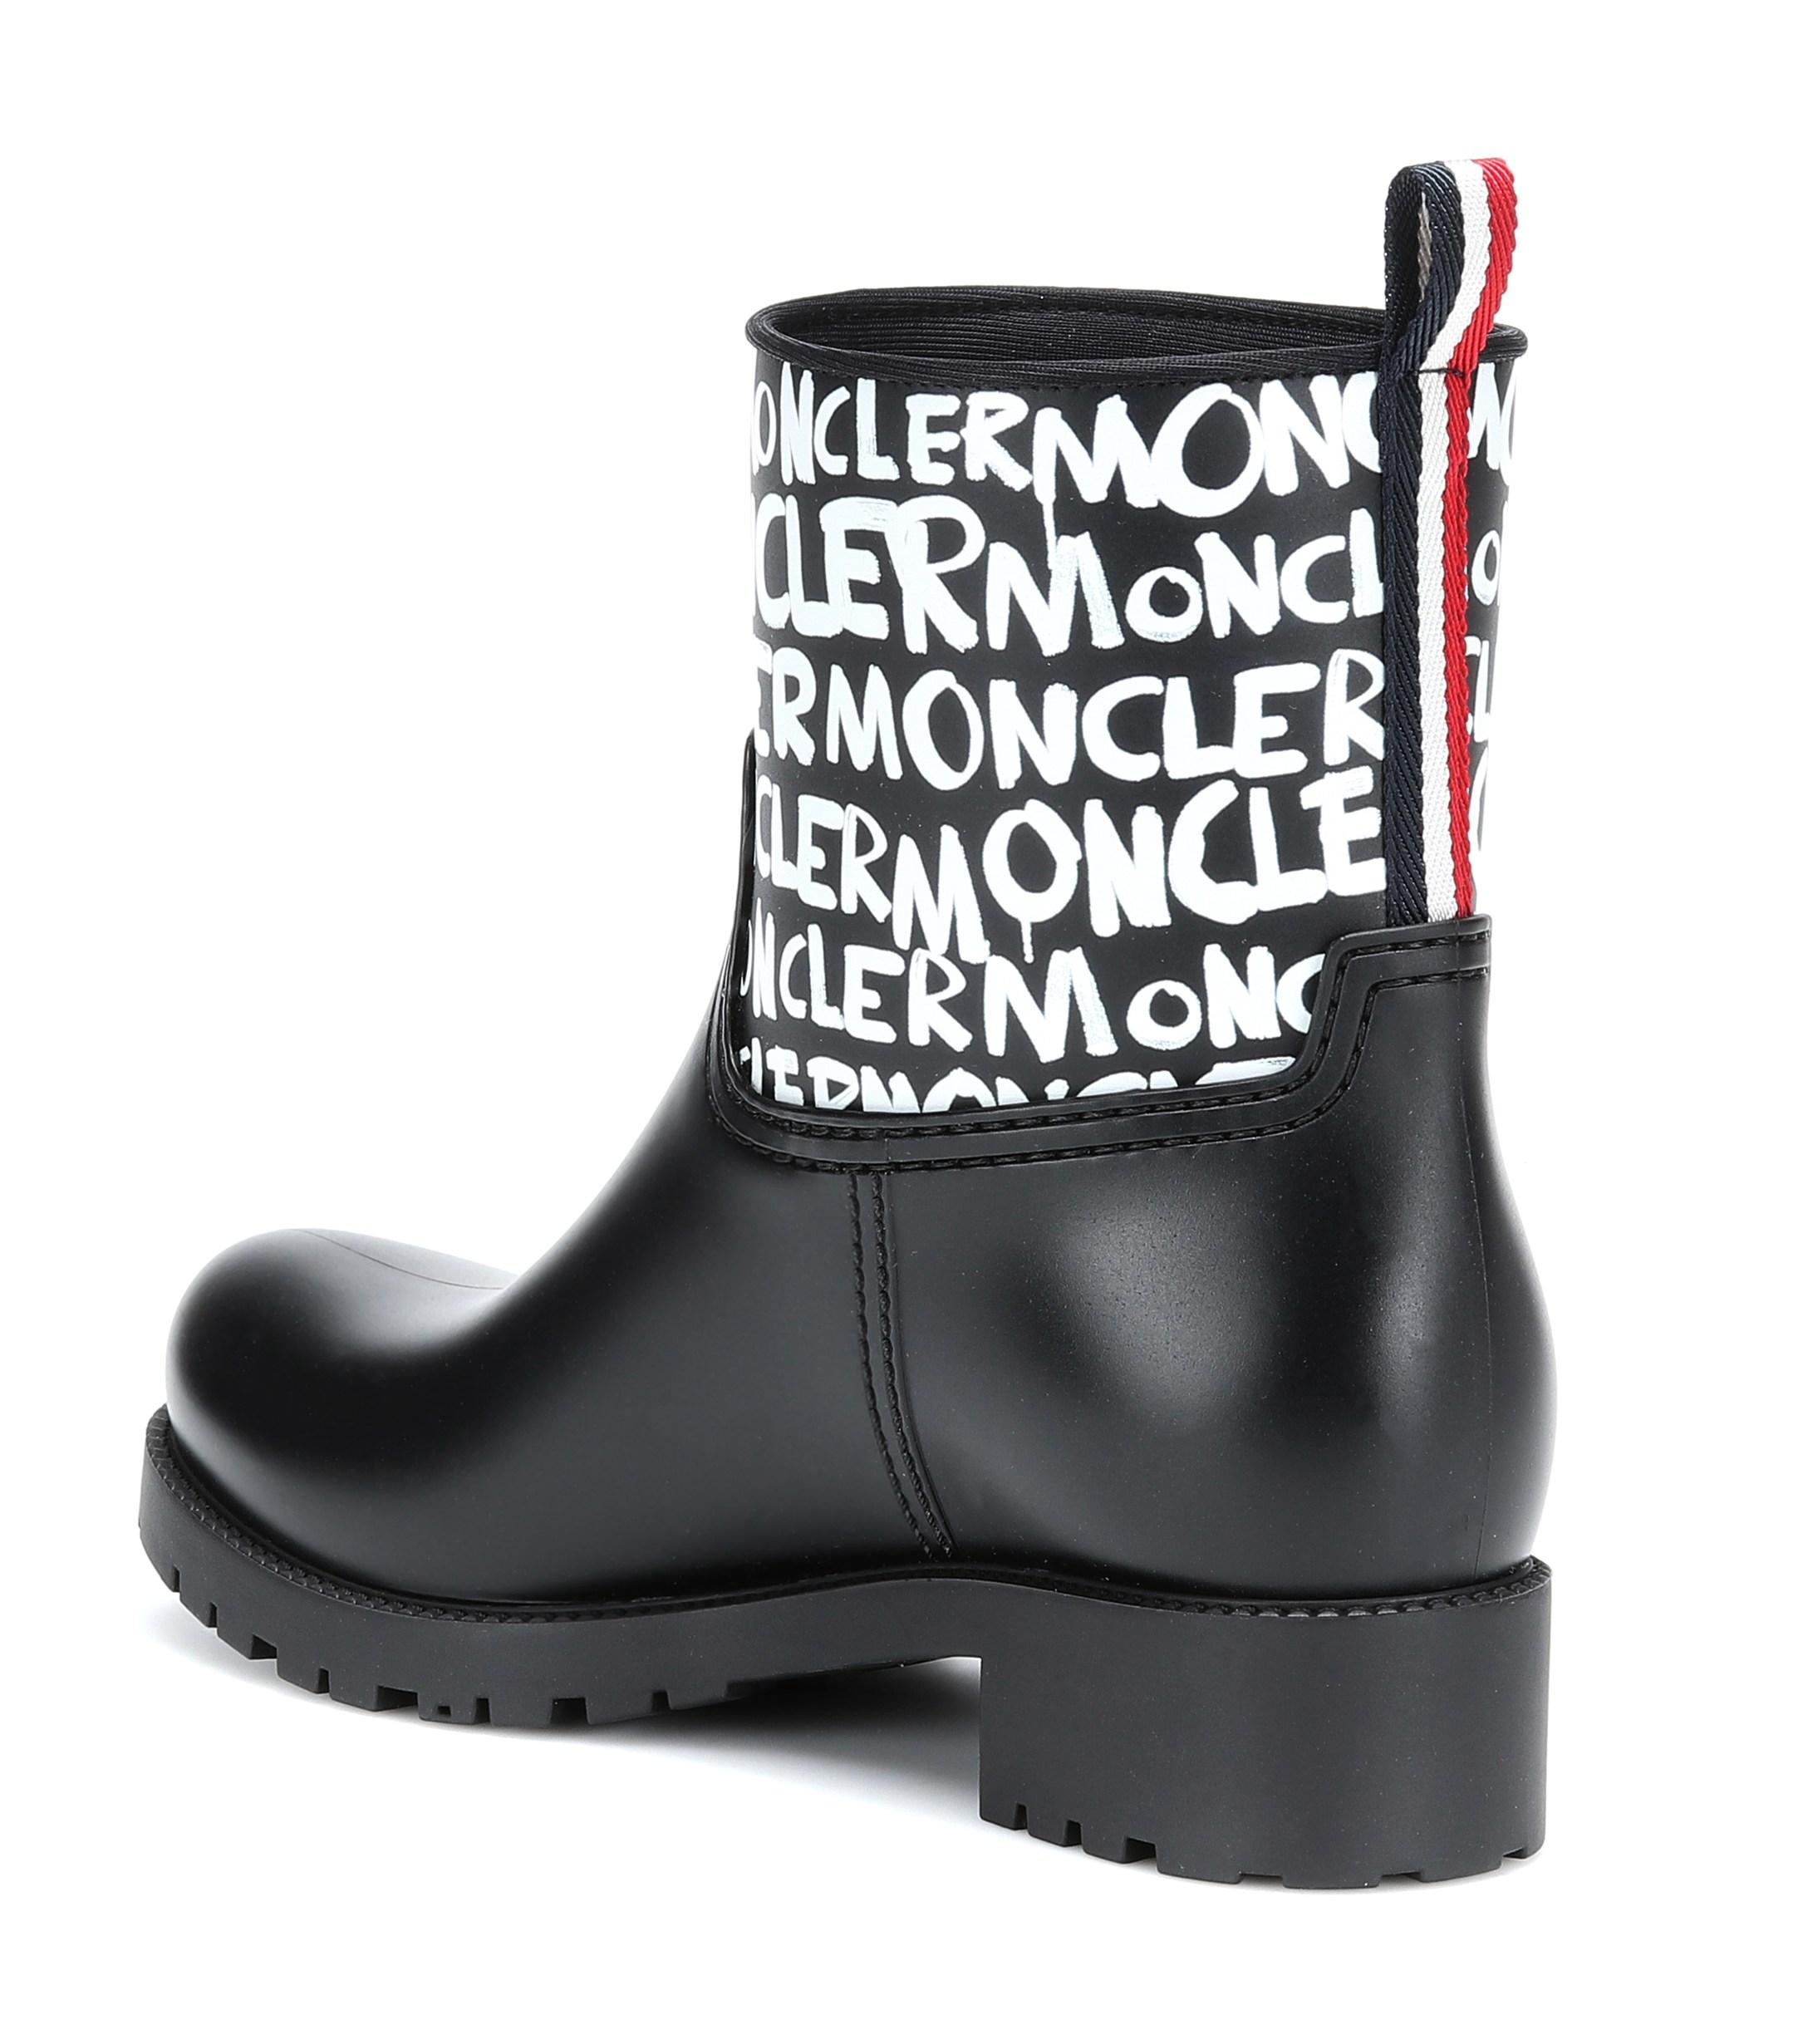 Moncler Neoprene Ginette Rain Boots in Charcoal (Black) - Save 50 